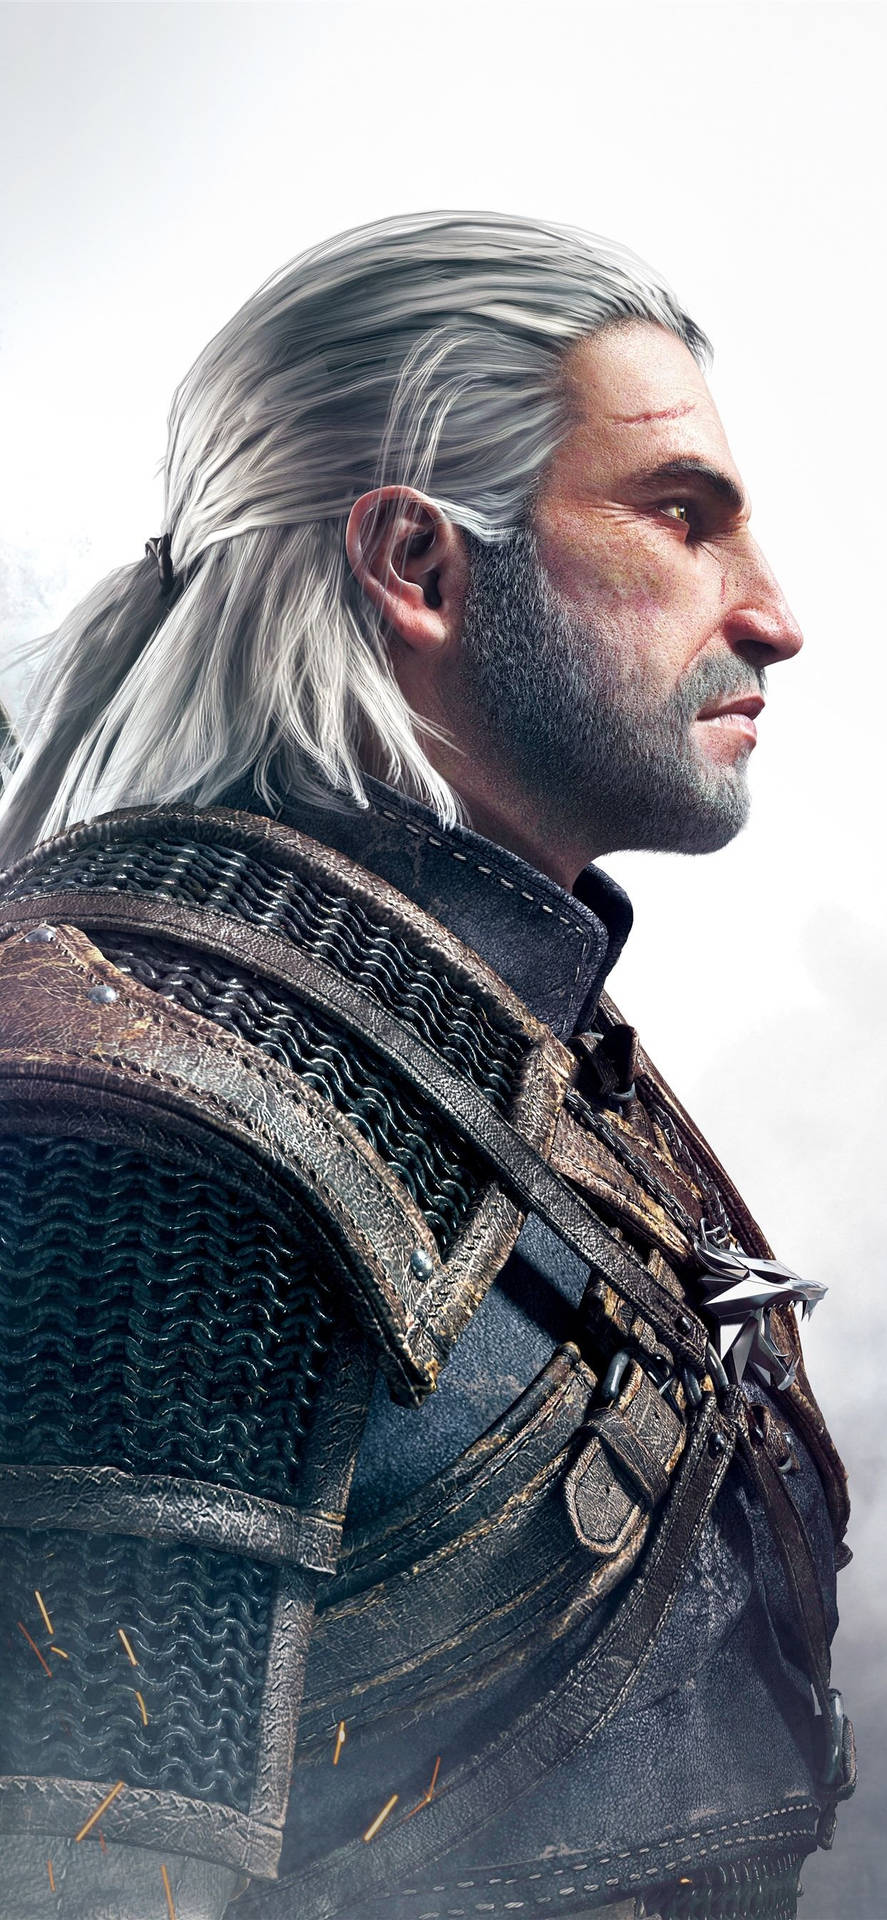 Witcher 3 Android 1242 X 2688 Wallpaper